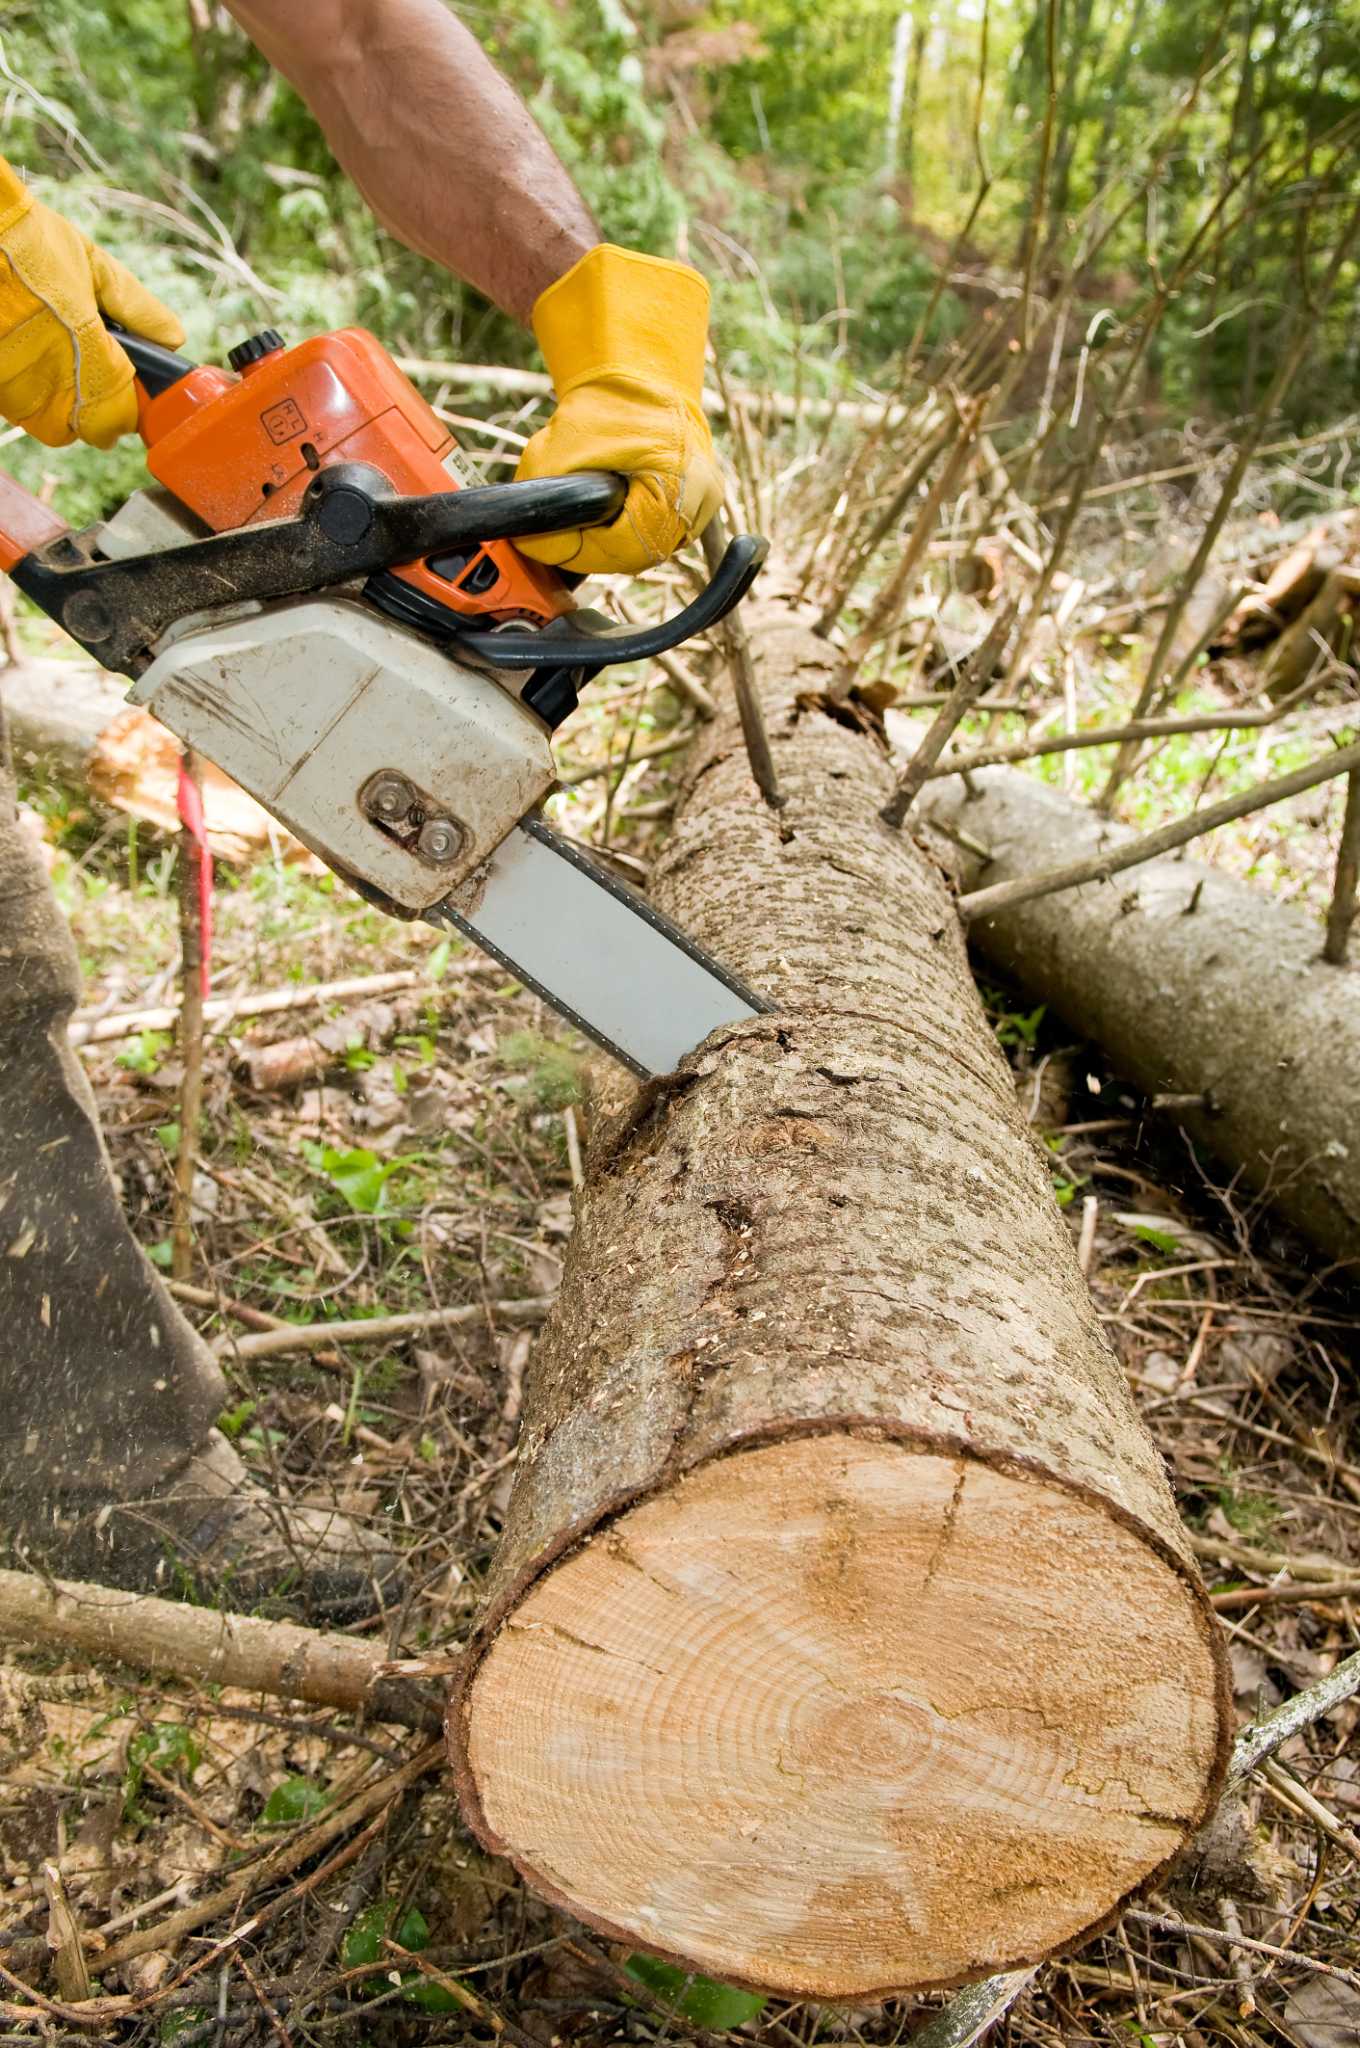 Stihl MS 280 Chainsaw Review - Should You Buy One?